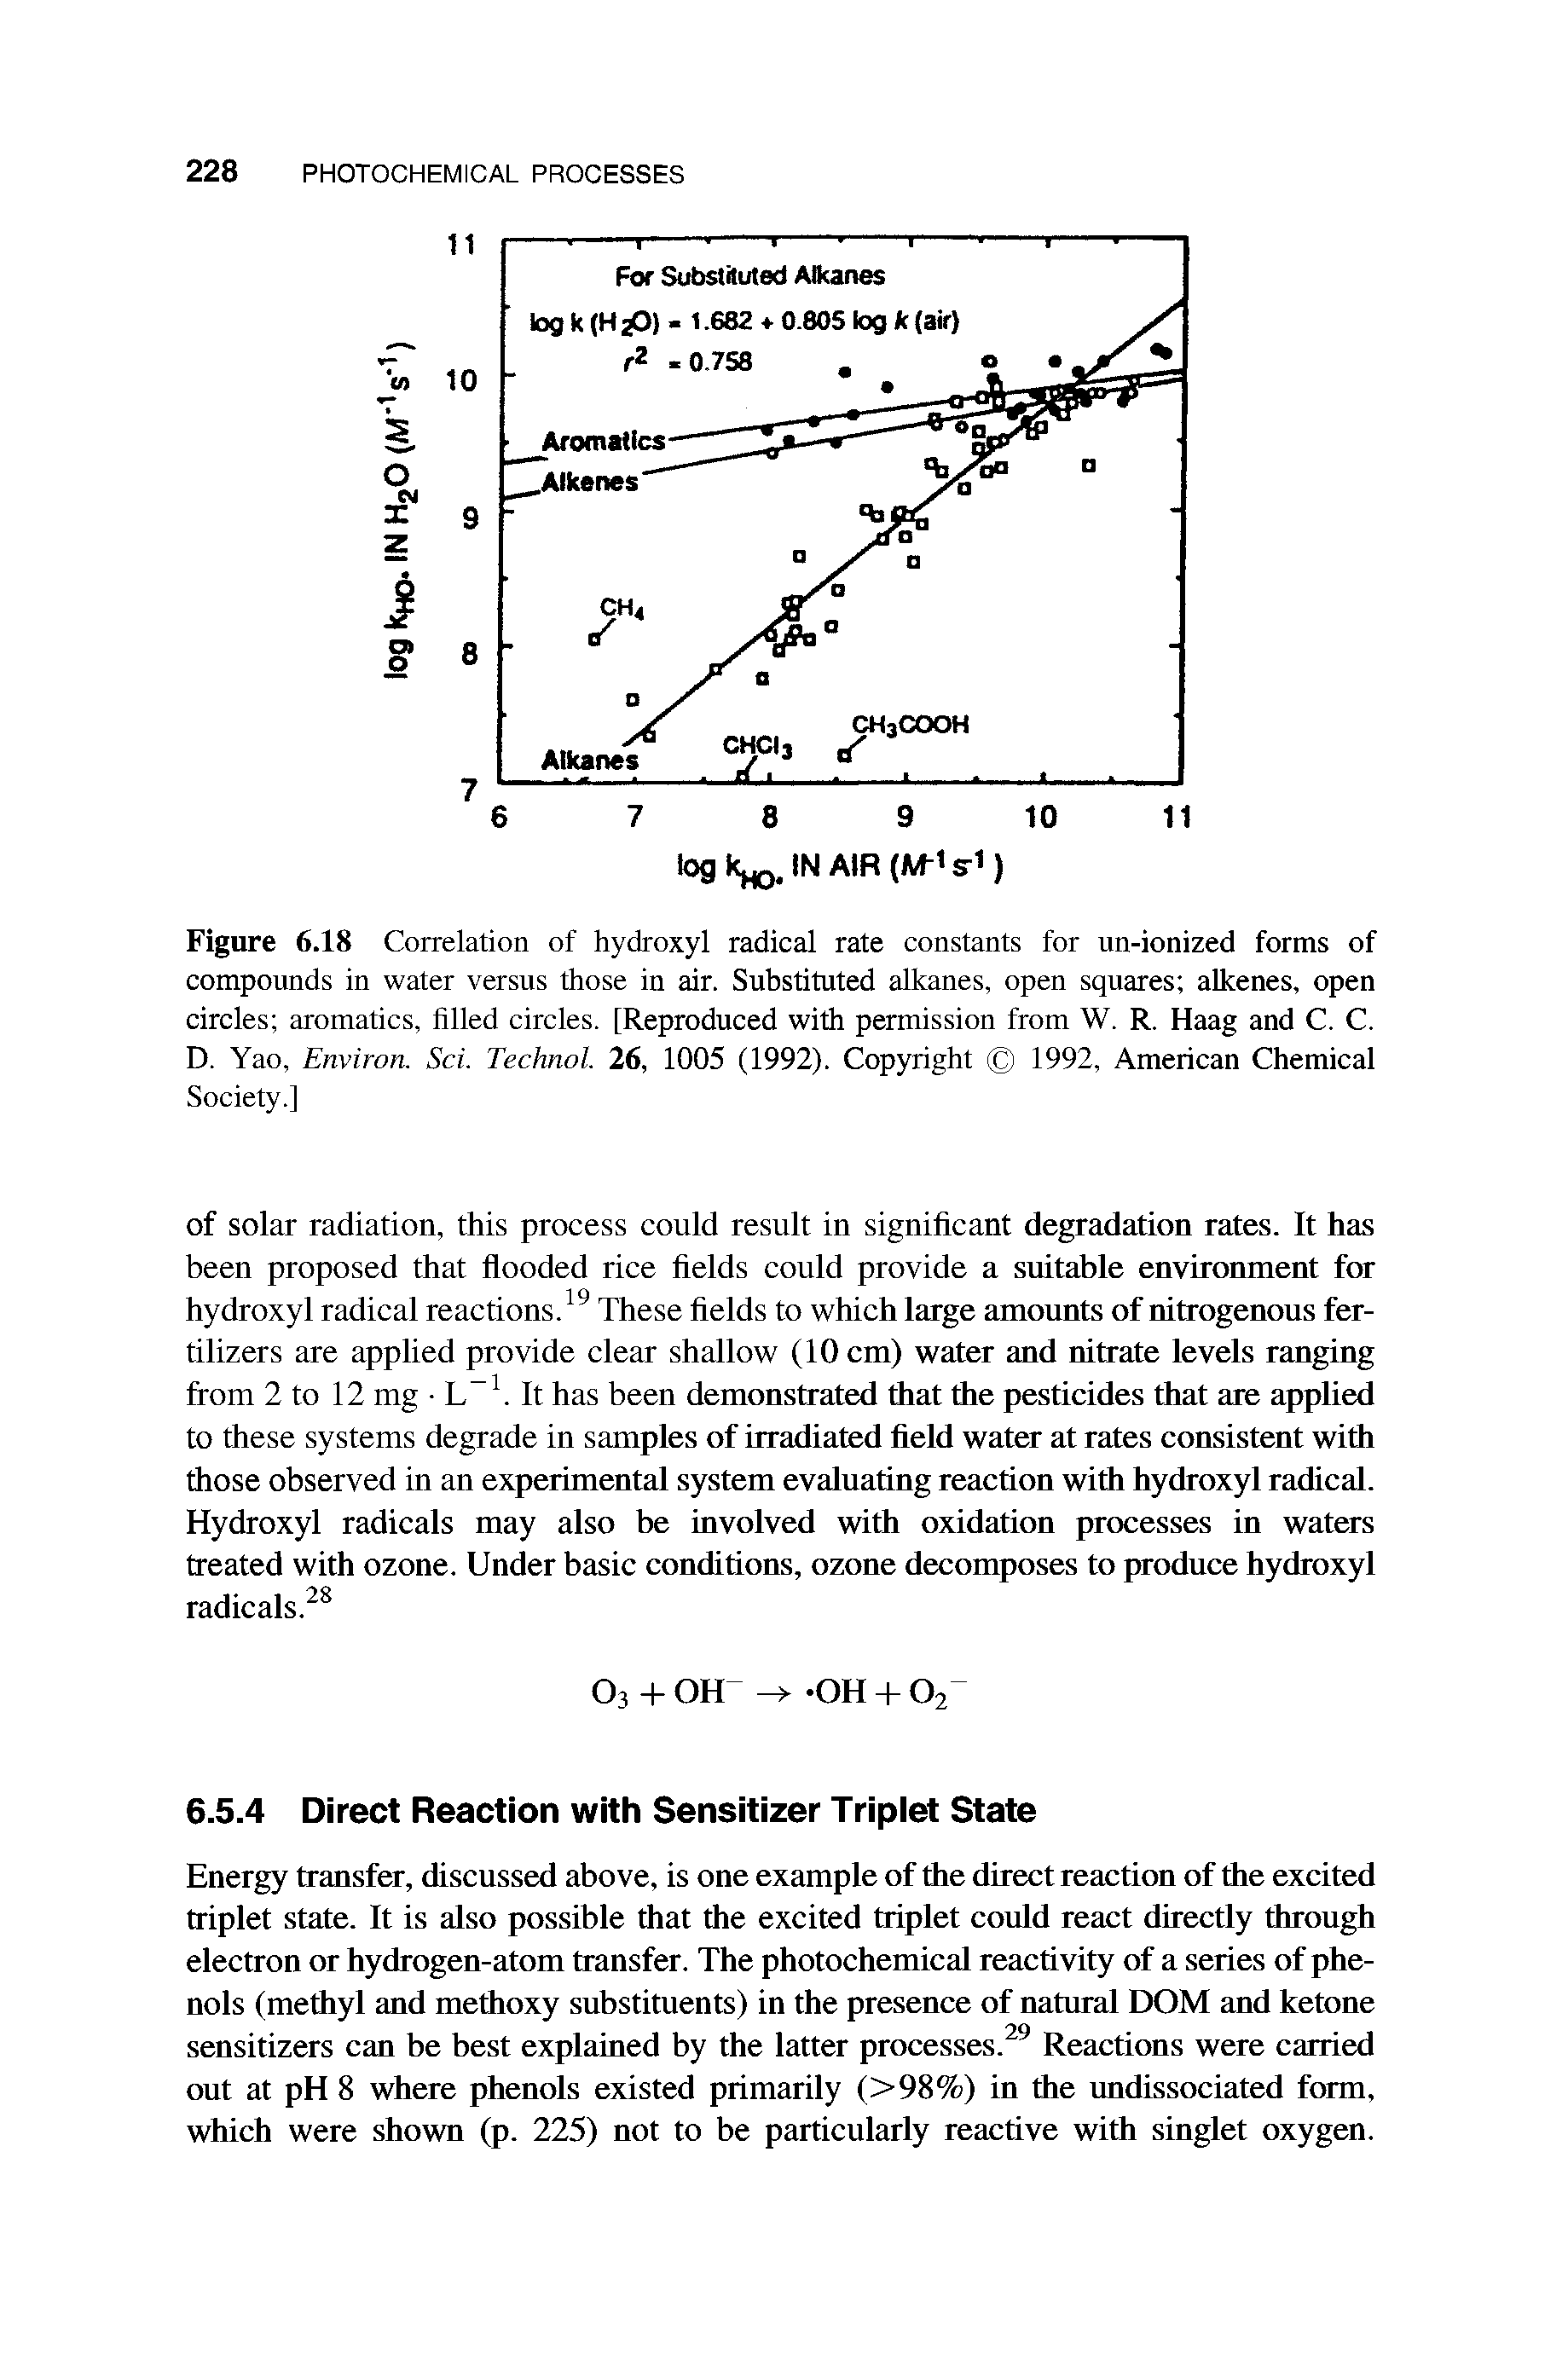 Figure 6.18 Correlation of hydroxyl radical rate constants for un-ionized forms of compounds in water versus those in air. Substituted alkanes, open squares alkenes, open circles aromatics, Hlled circles. [Reproduced with permission from W. R. Haag and C. C. D. Yao, Environ. Sci. Technol. 26, 1005 (1992). Copyright 1992, American Chemical Society.]...